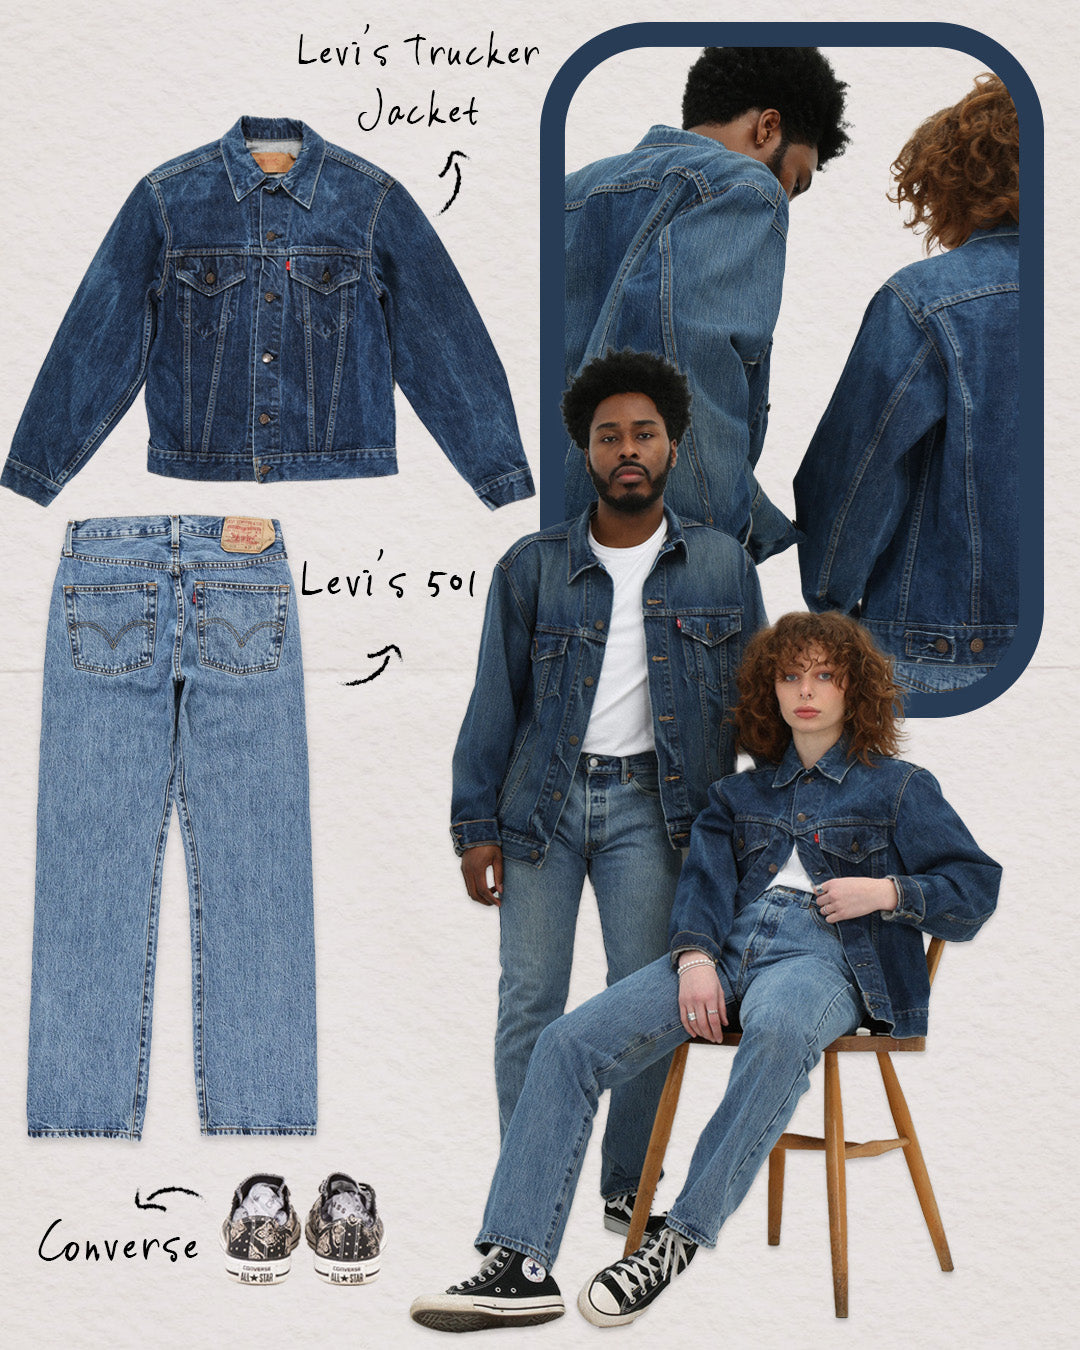 How To Spot Fake Vintage Levi's 501 Jeans | Glass Onion